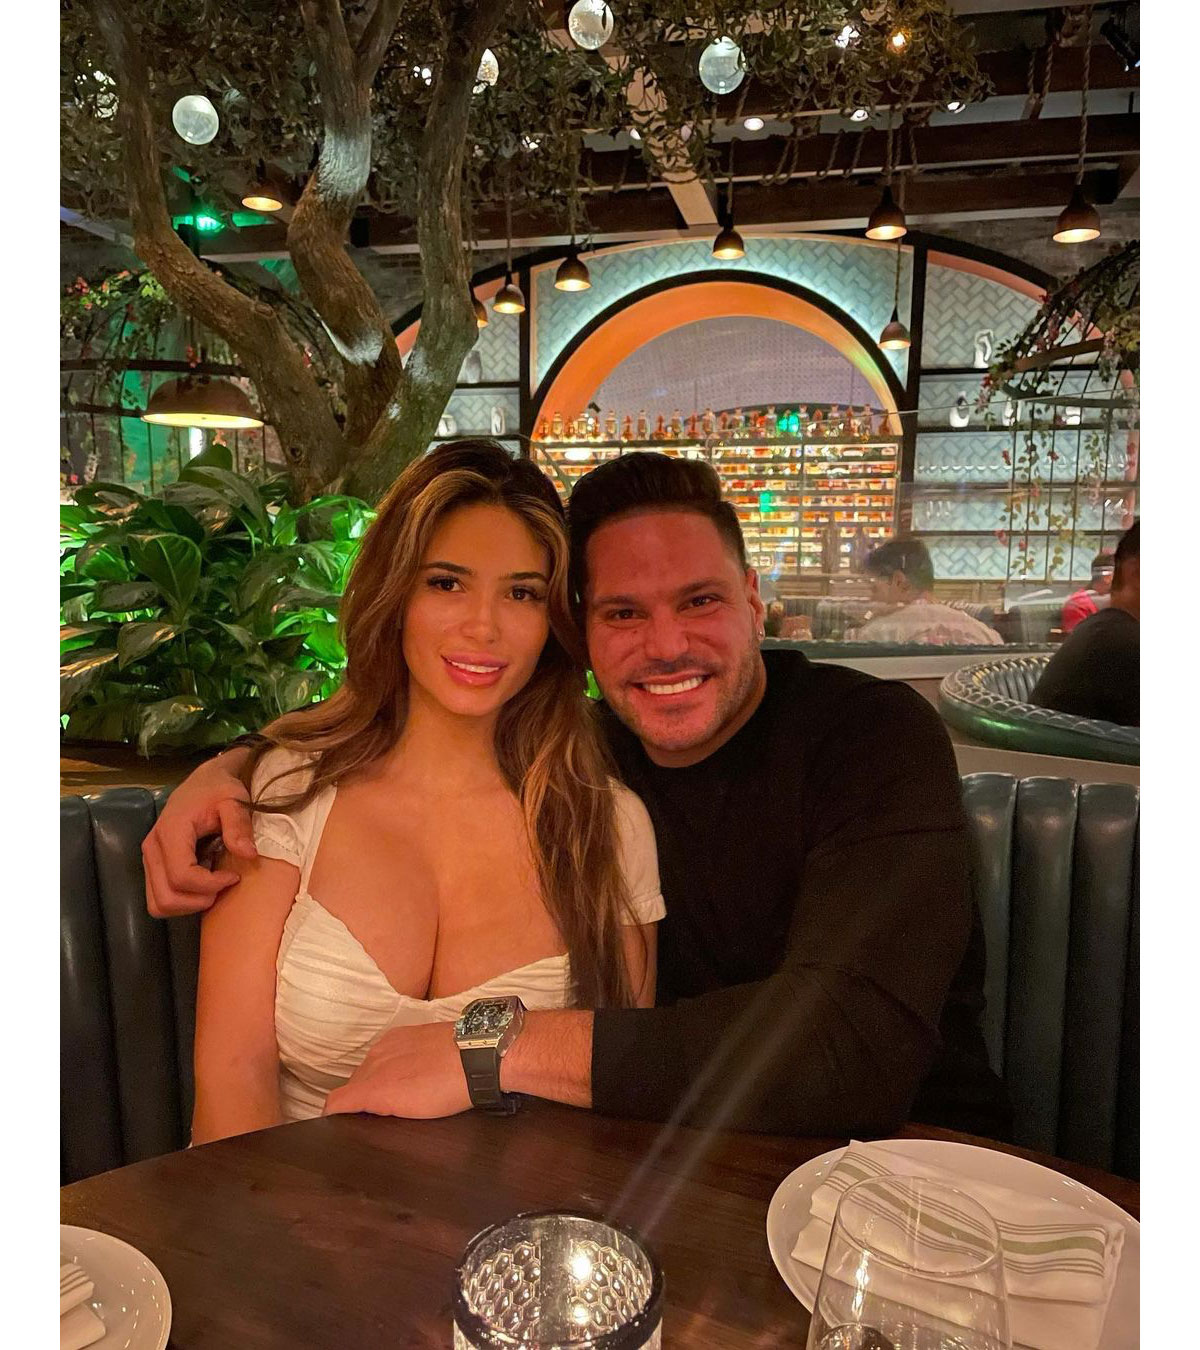 Ronnie Ortiz-Magro Posts Photo With Girlfriend After His Arrest